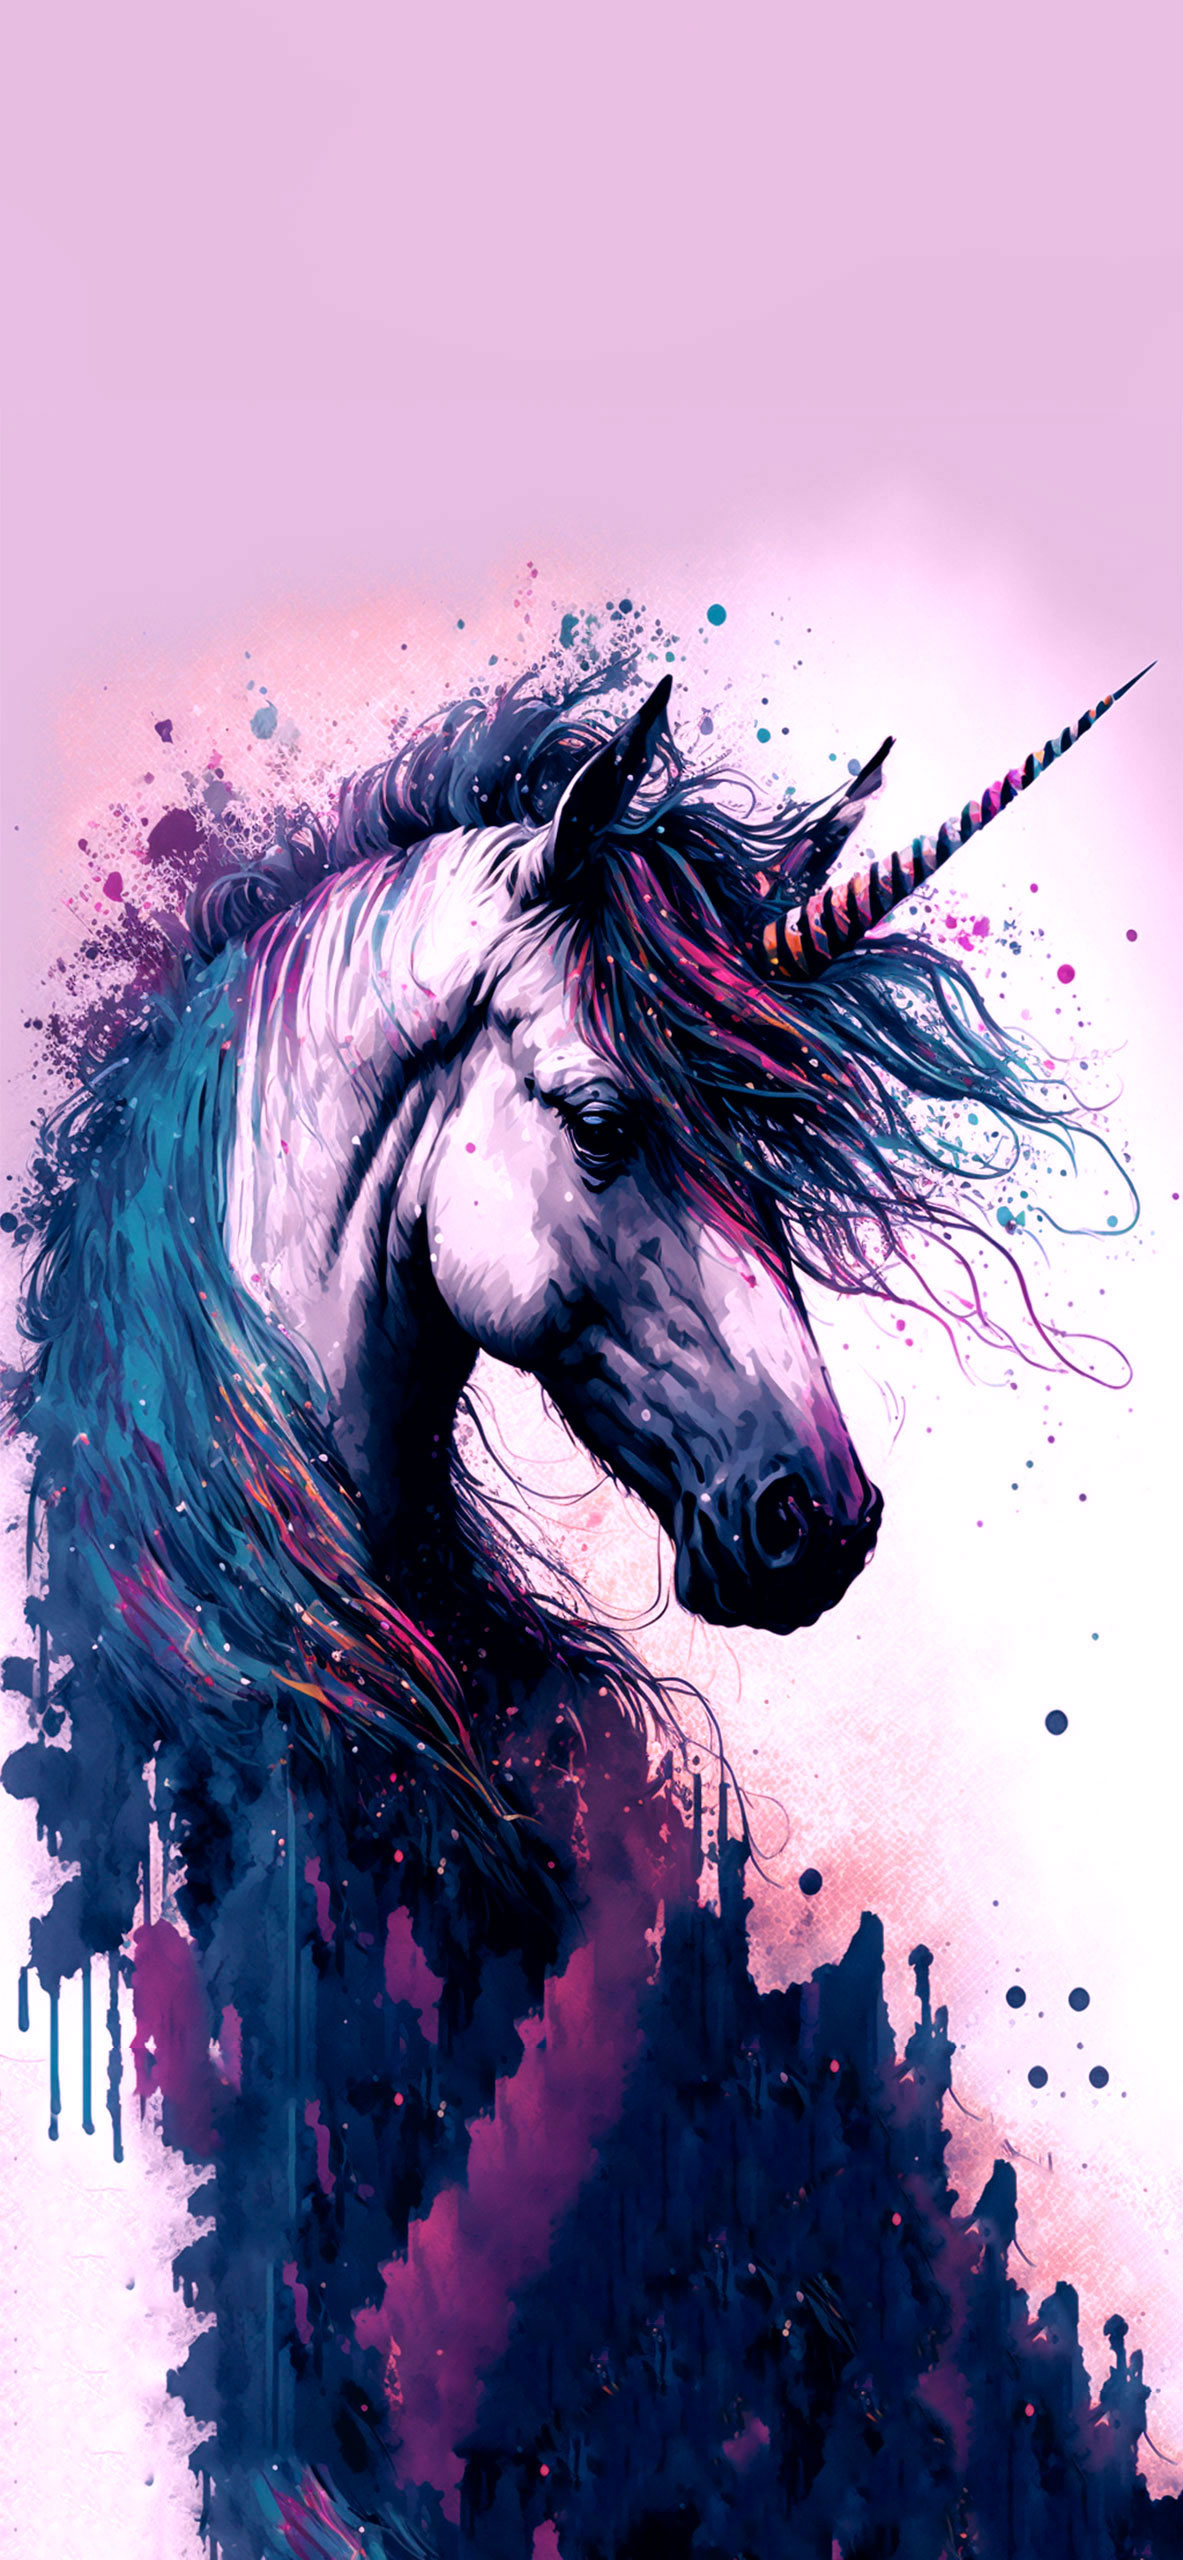 Download Unicorn Wallpaper by angginilenes  eb  Free on ZEDGE now  Browse millions of popula  Unicorn wallpaper cute Unicorn wallpaper  Pink unicorn wallpaper